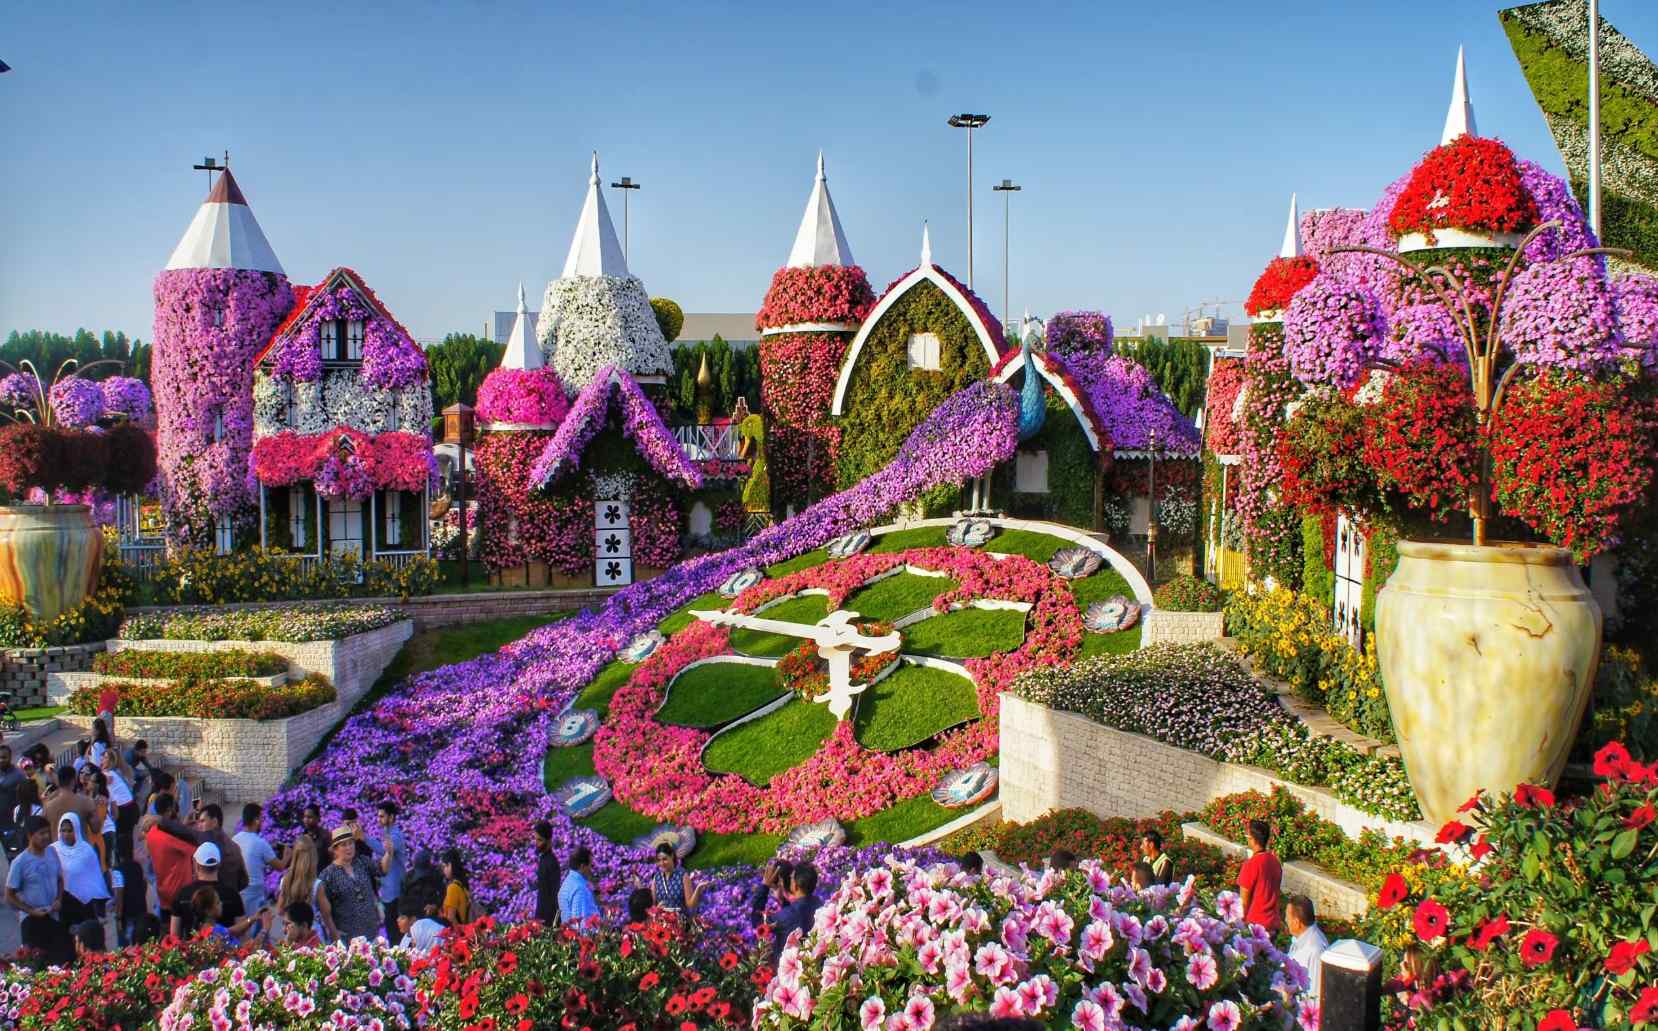 Dubai's miracle garden is one of the best artificial wonders. Here, you will learn how to get a Dubai Miracle Garden ticket at a low cost.